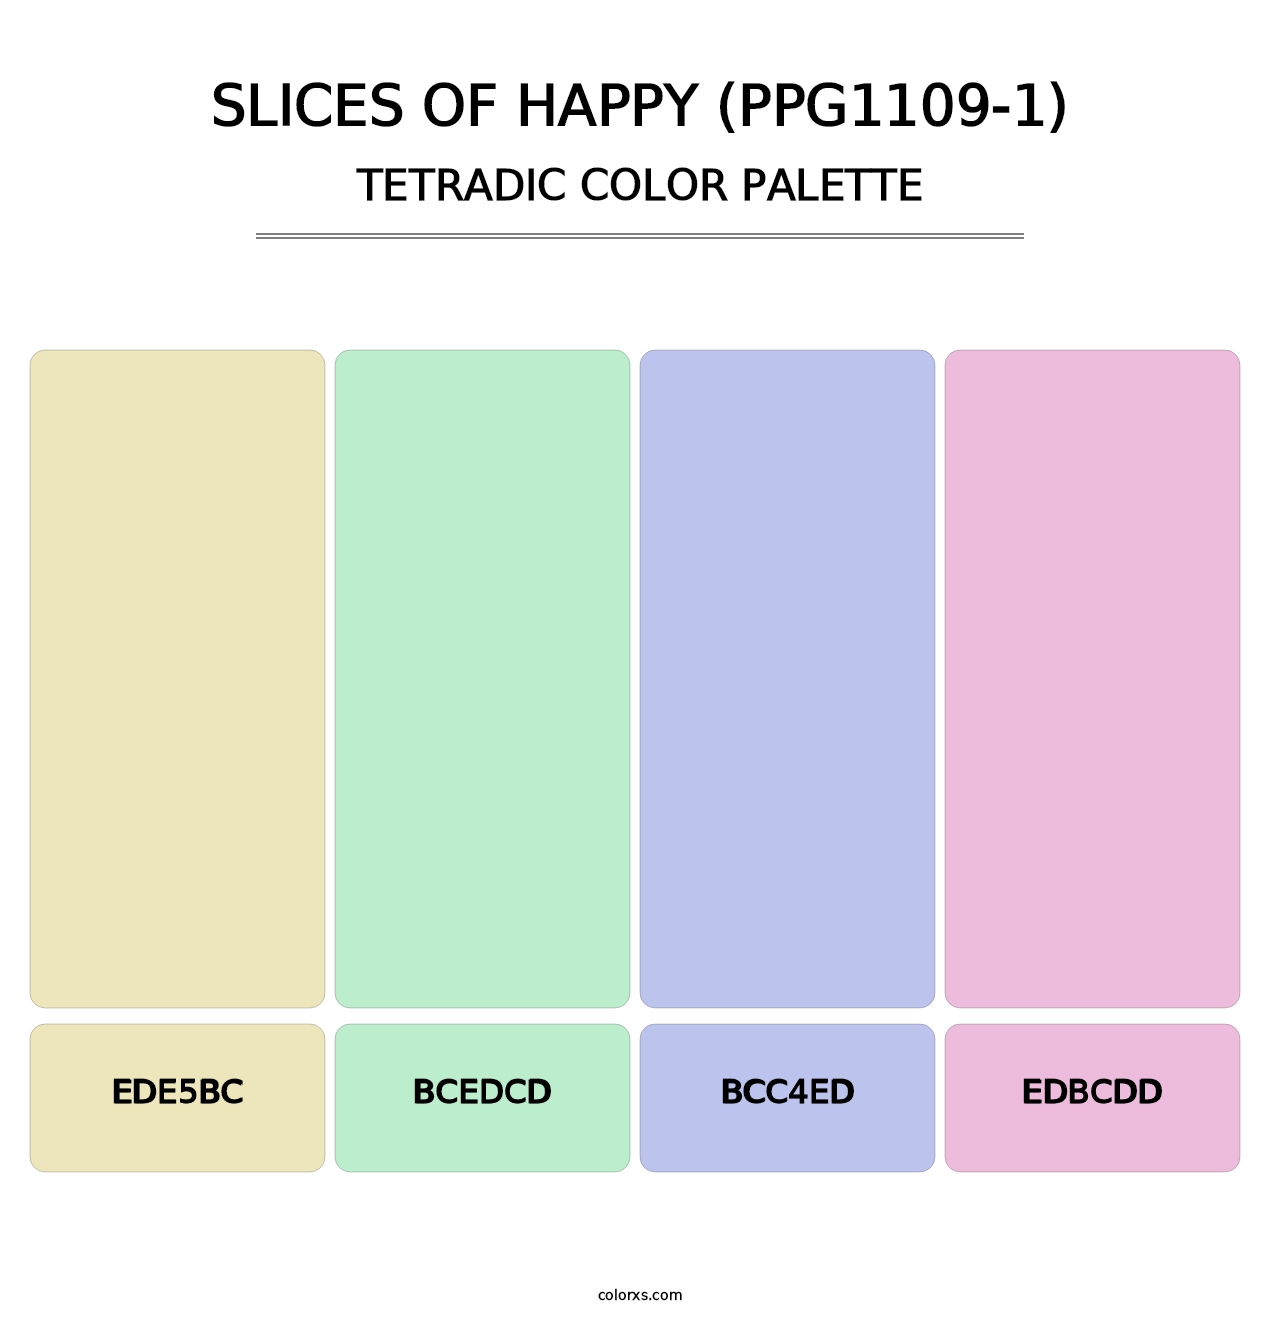 Slices Of Happy (PPG1109-1) - Tetradic Color Palette